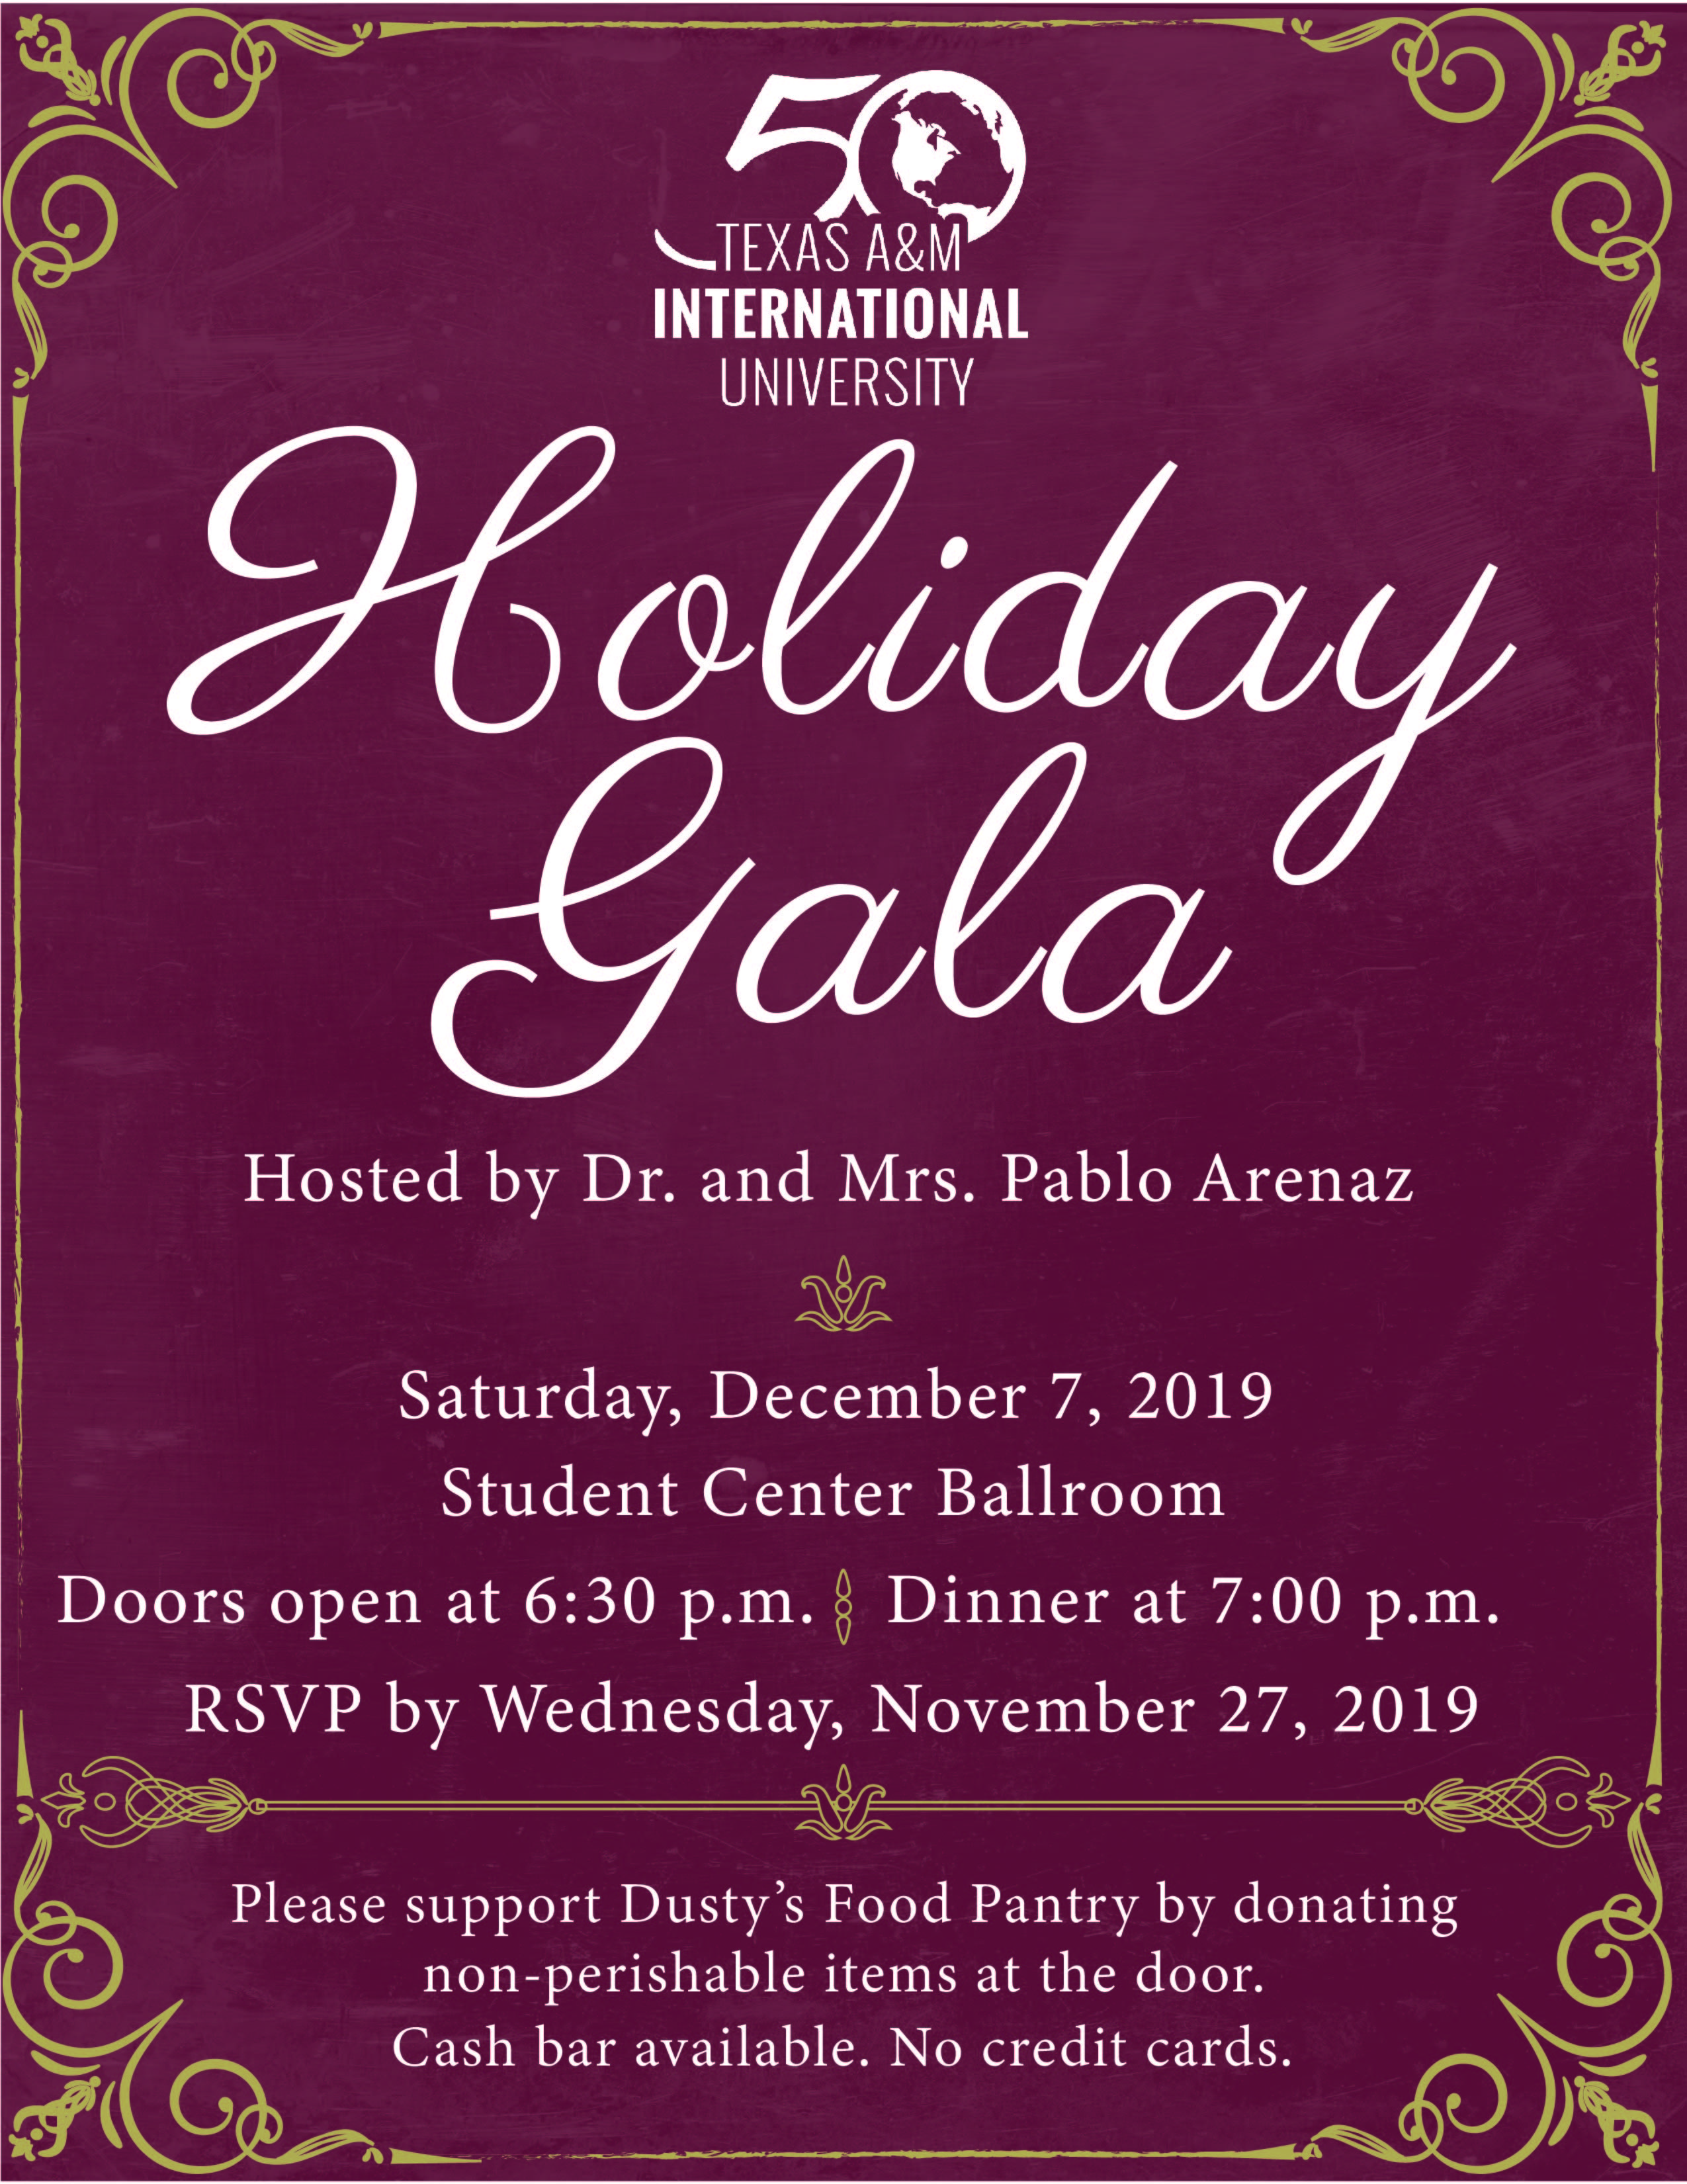 2019 Holiday Gala, taking place on Saturday, December 7, 2019